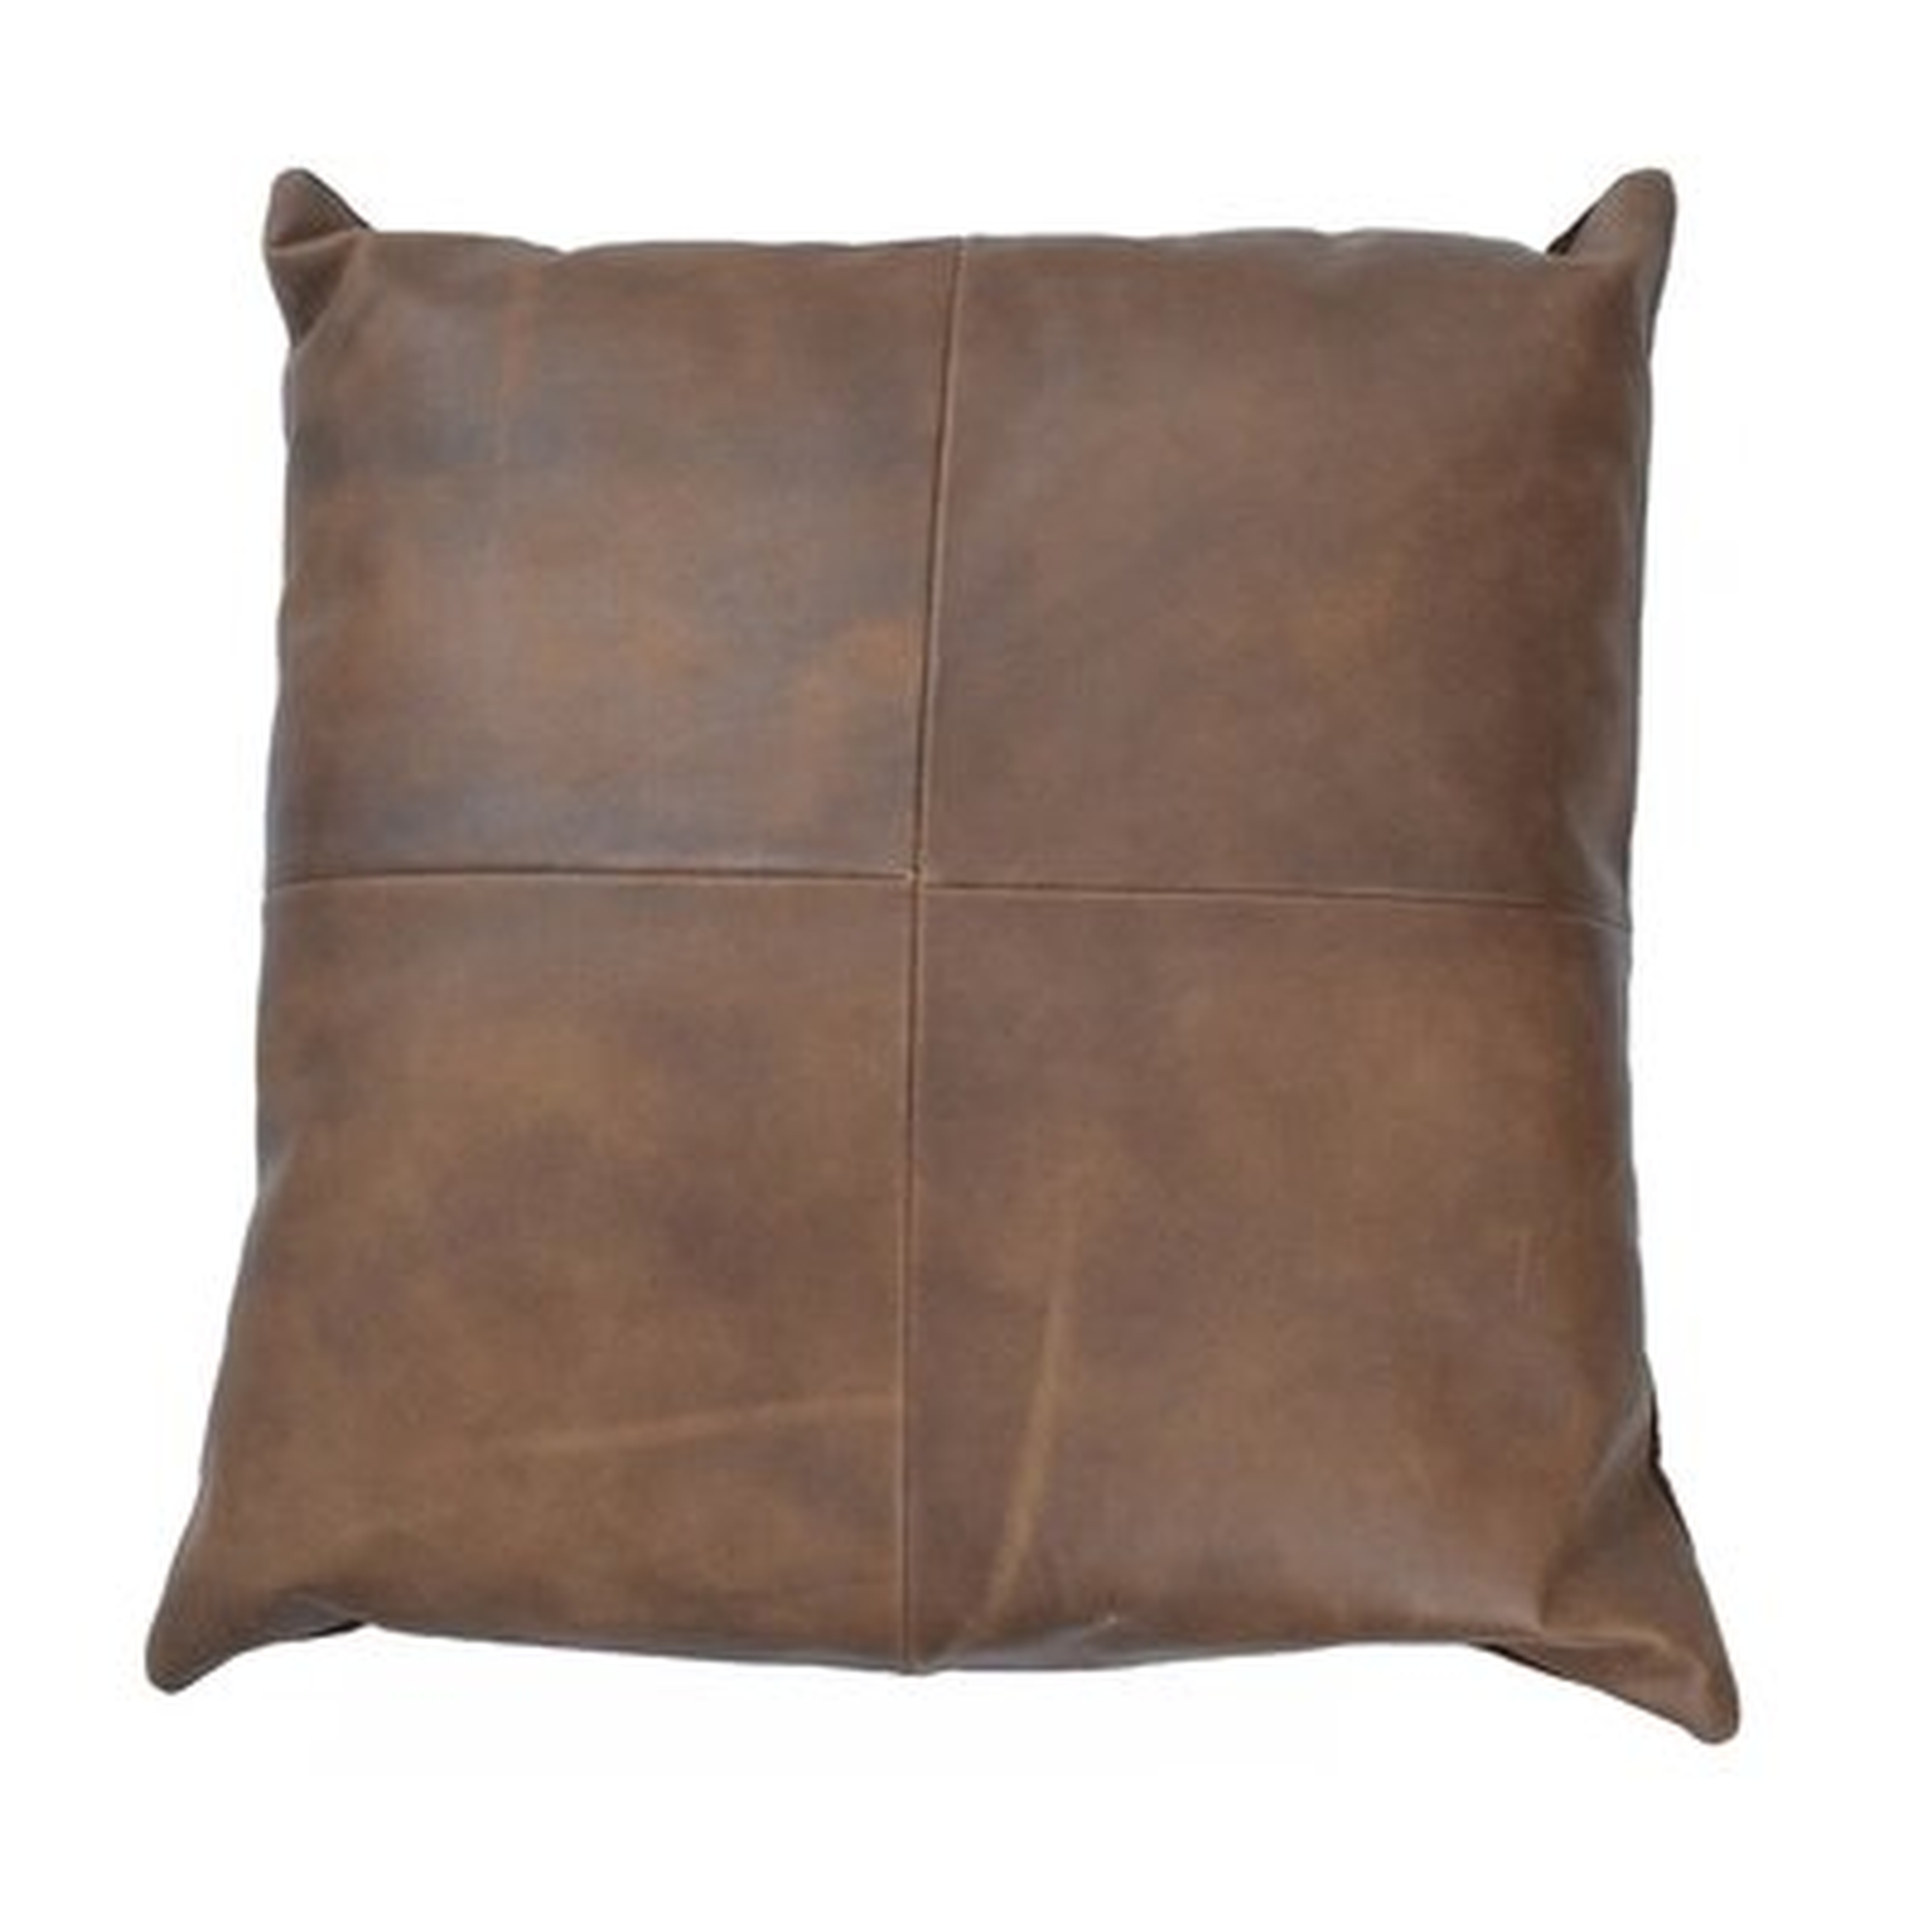 Harton Square Leather Pillow Cover and Insert - Wayfair